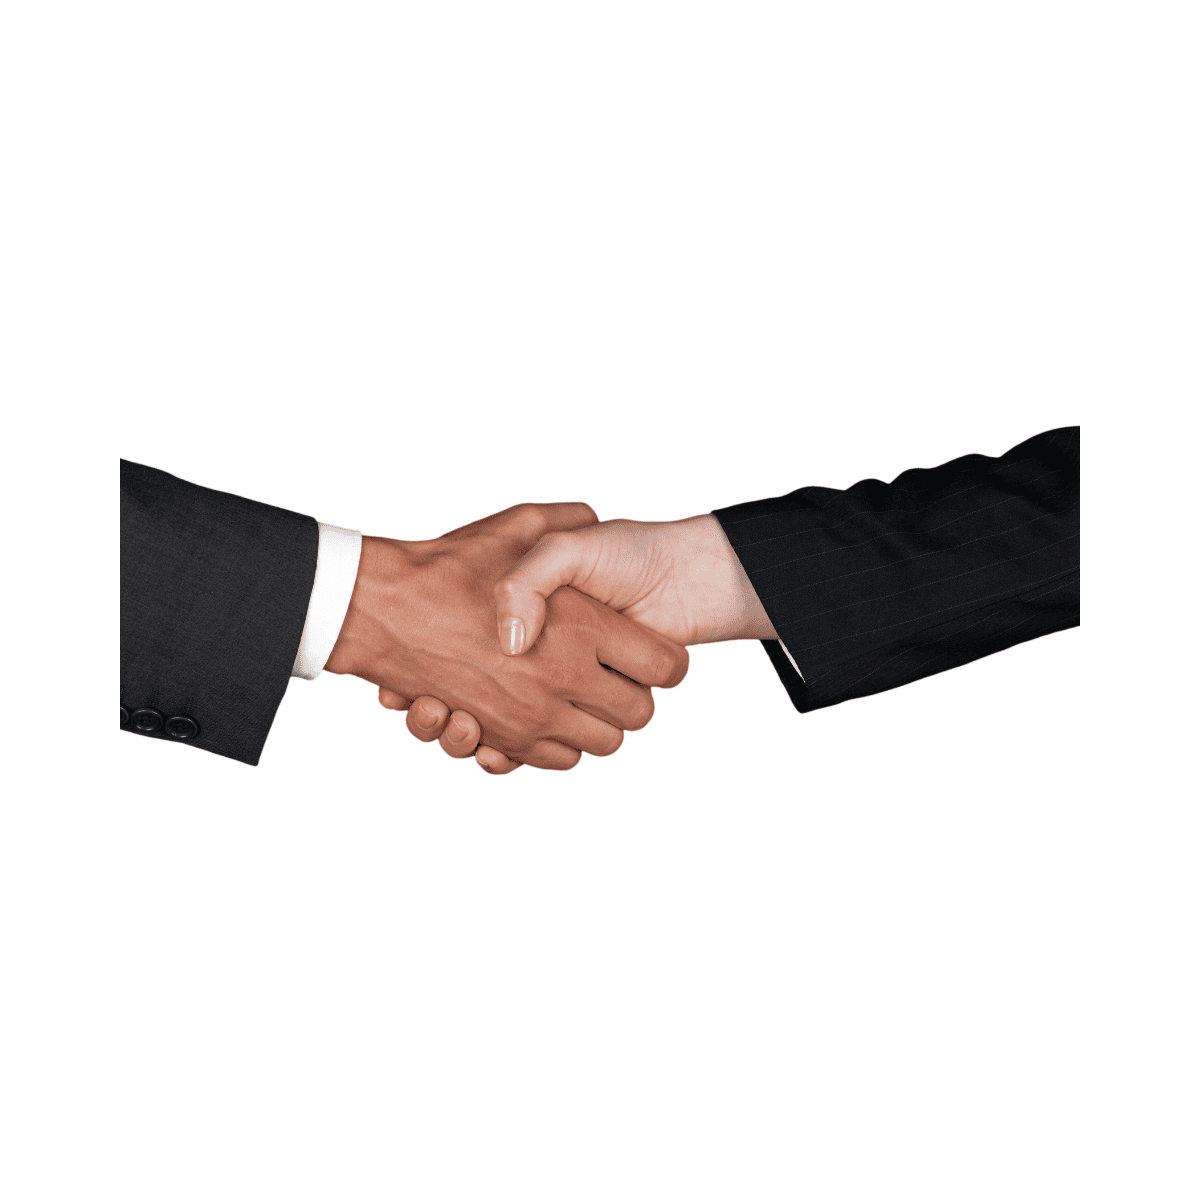 Athlete and businessman shaking hands